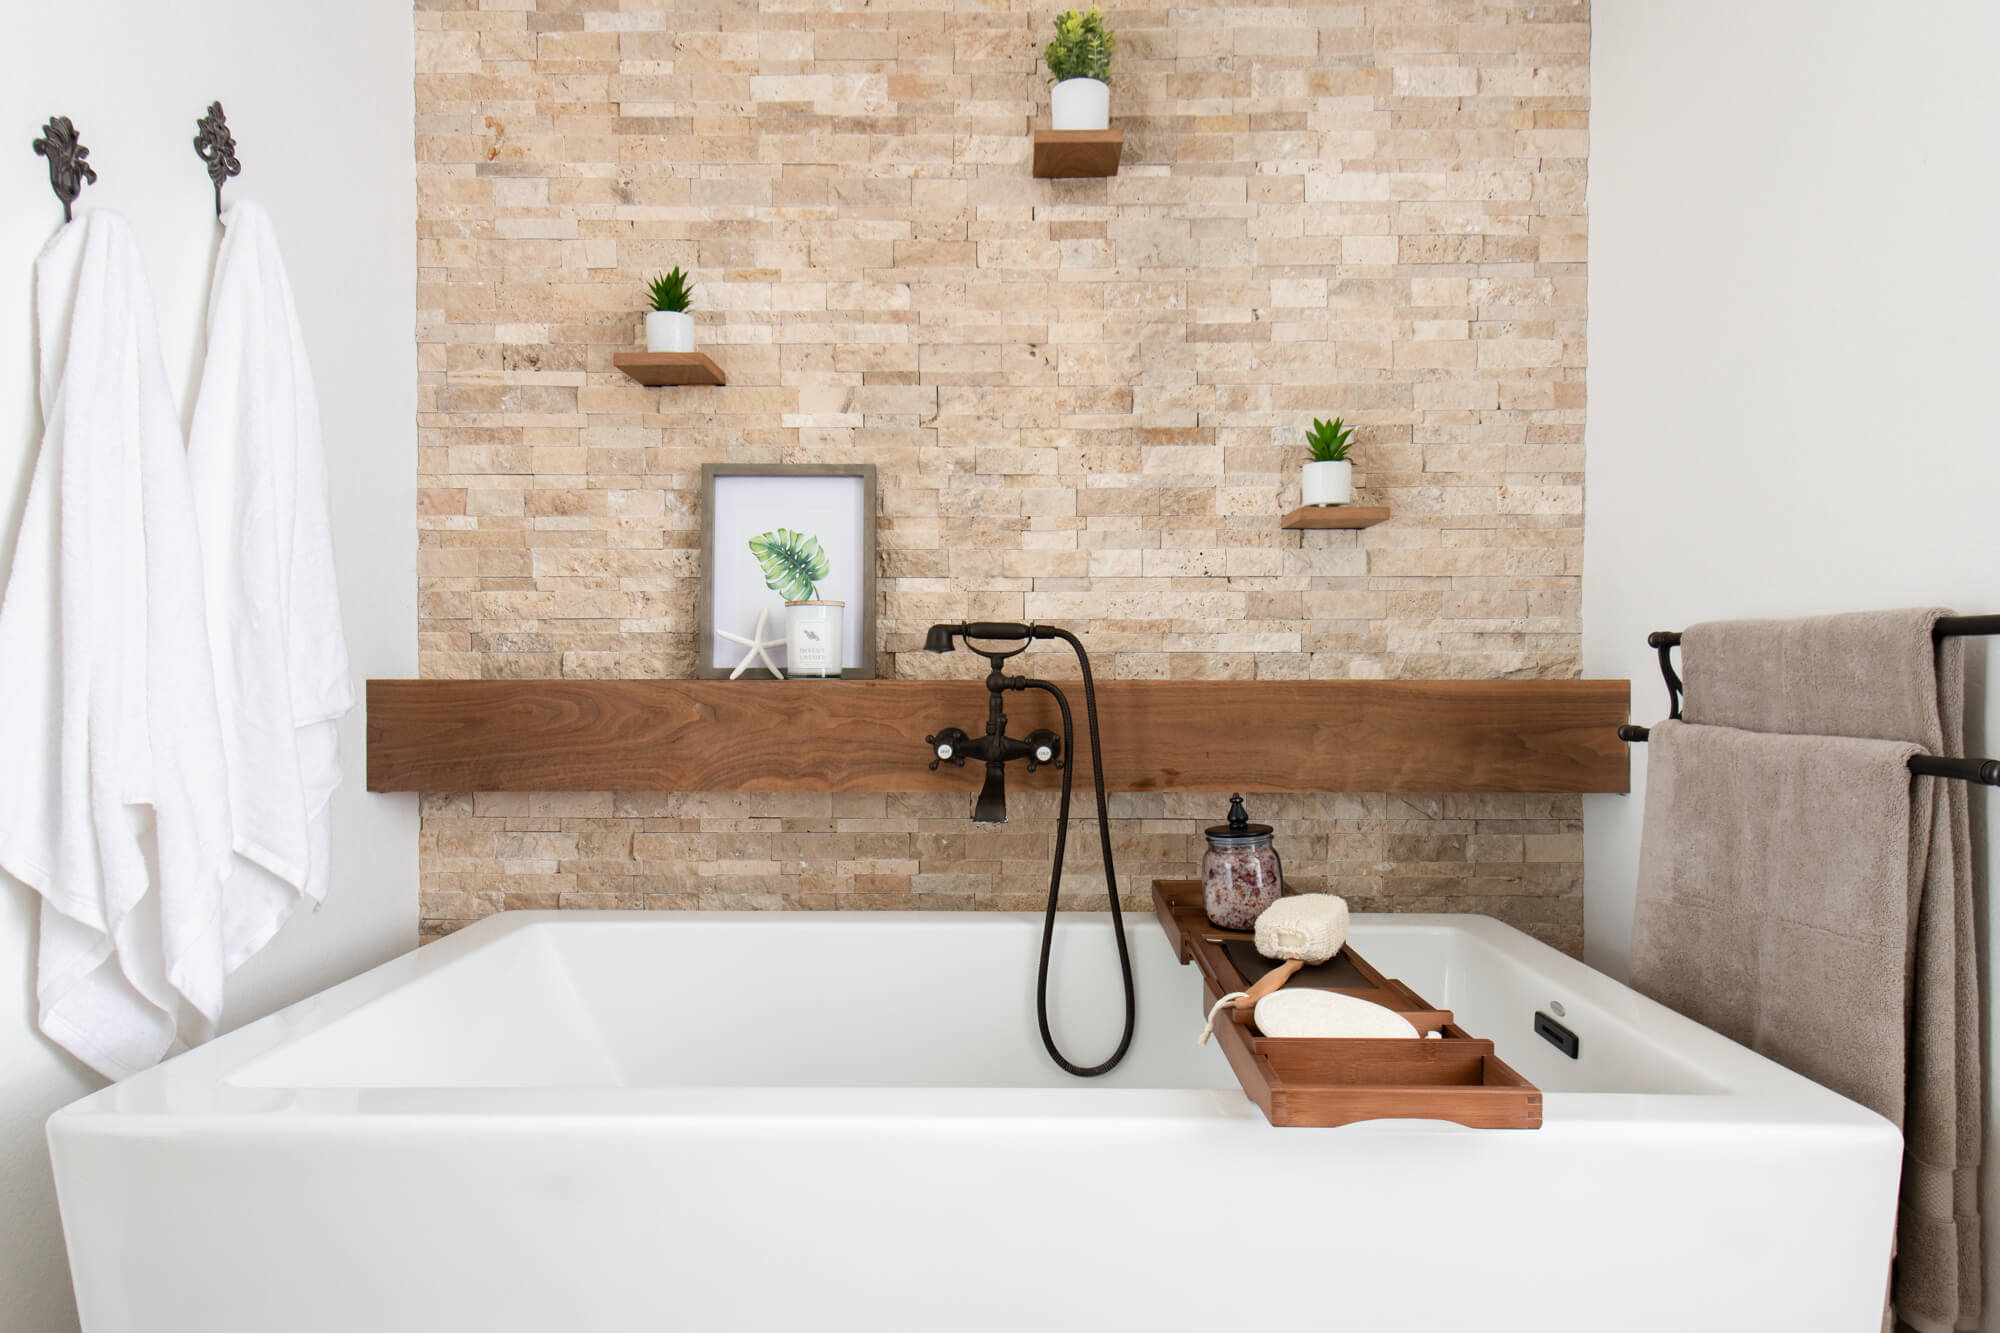 Spa Like Bathtub Remodel with Stone Accent Wall - bring color into the bathroom